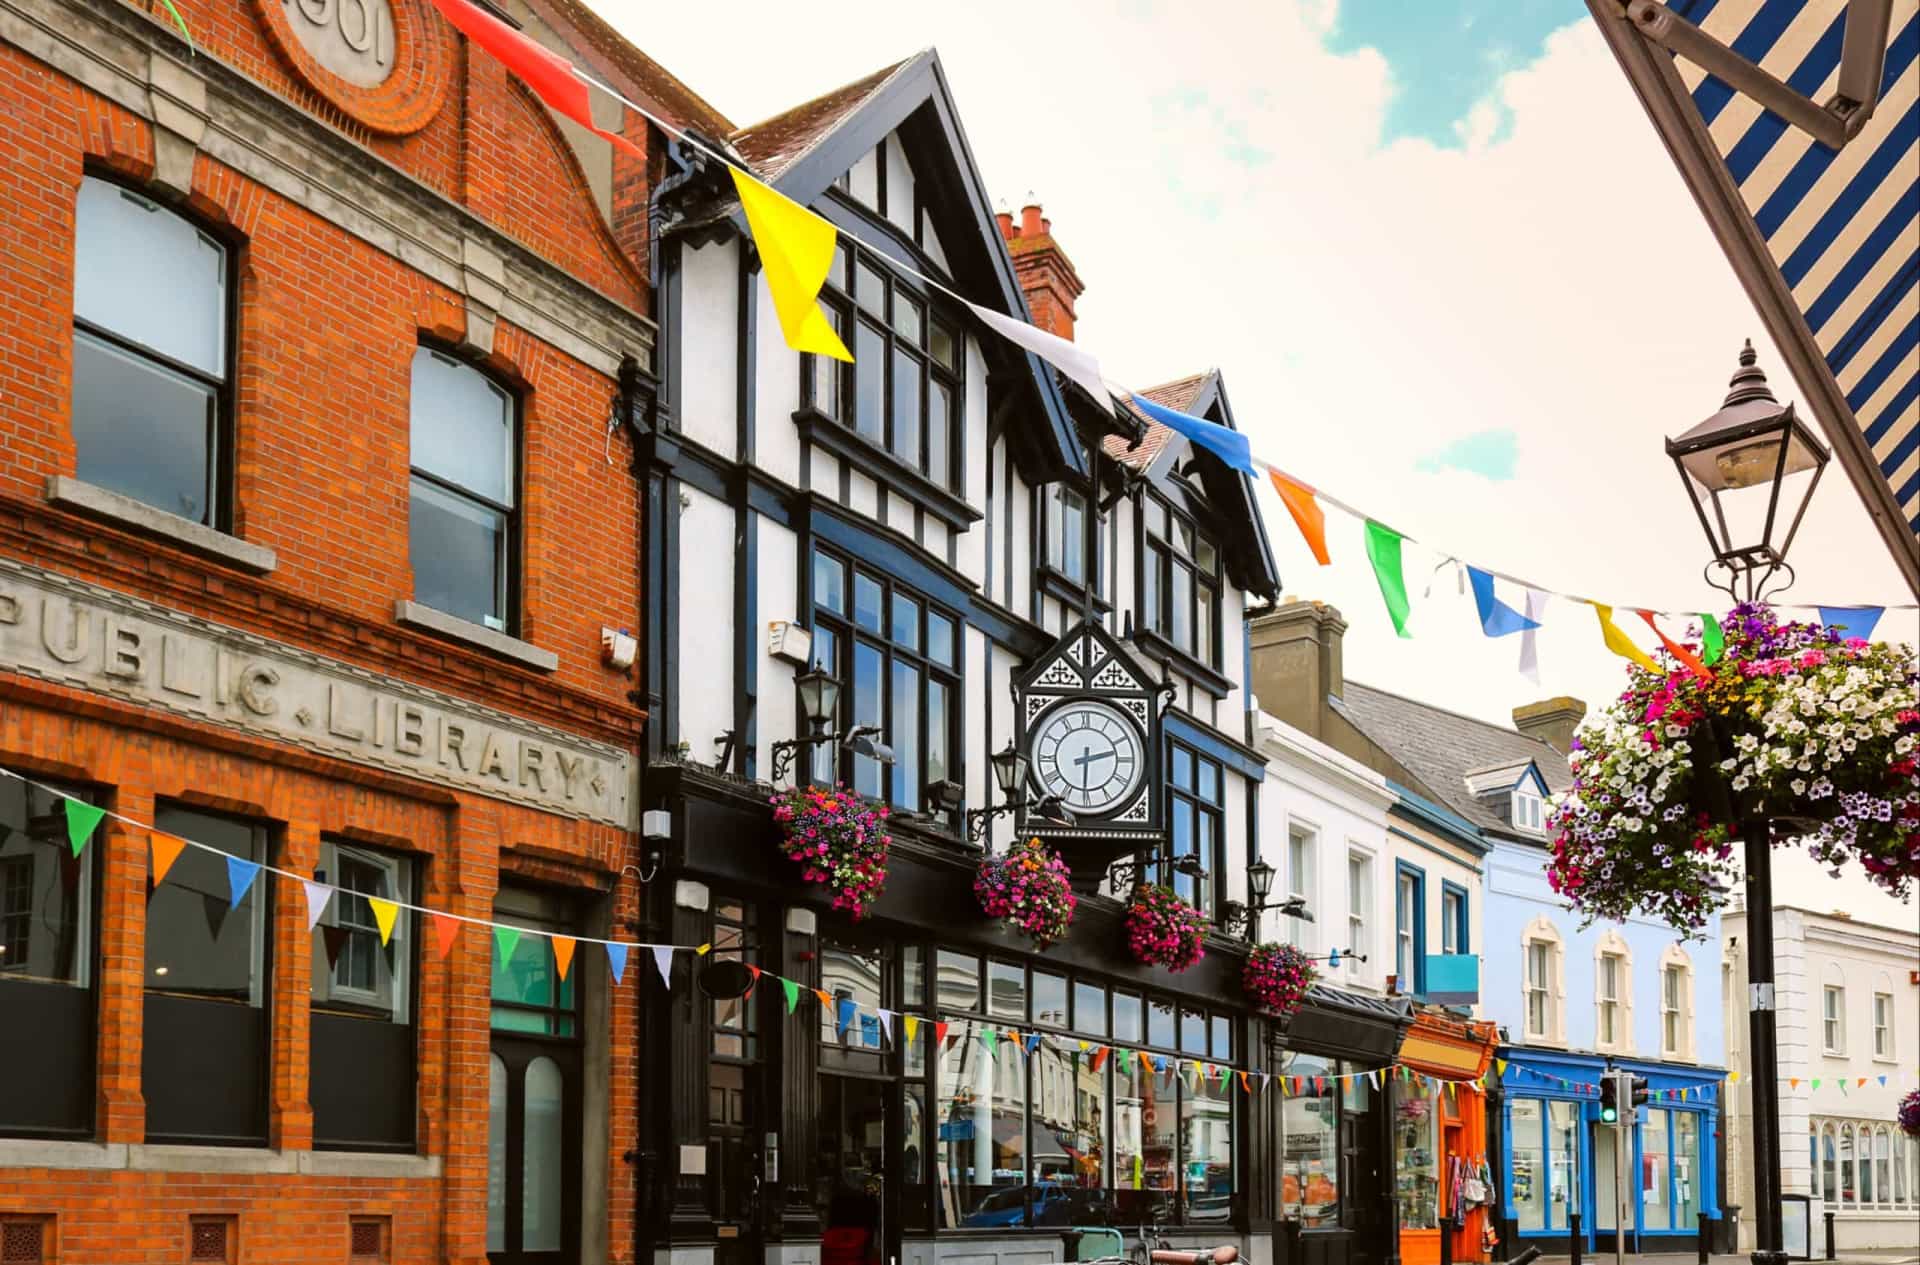 <p>Dalkey, a seaside resort southeast of <a href="https://www.starsinsider.com/travel/477519/delving-into-dublin-the-impressive-irish-capital" rel="noopener">Dublin</a>, is one of the city's wealthiest districts. Irish playwright George Bernard Shaw lived here, as does the likes of U2's Bono and fellow musical performers Van Morrison and Enya. Some of Dalkey's main street has structures dating back to the 10th century.</p>